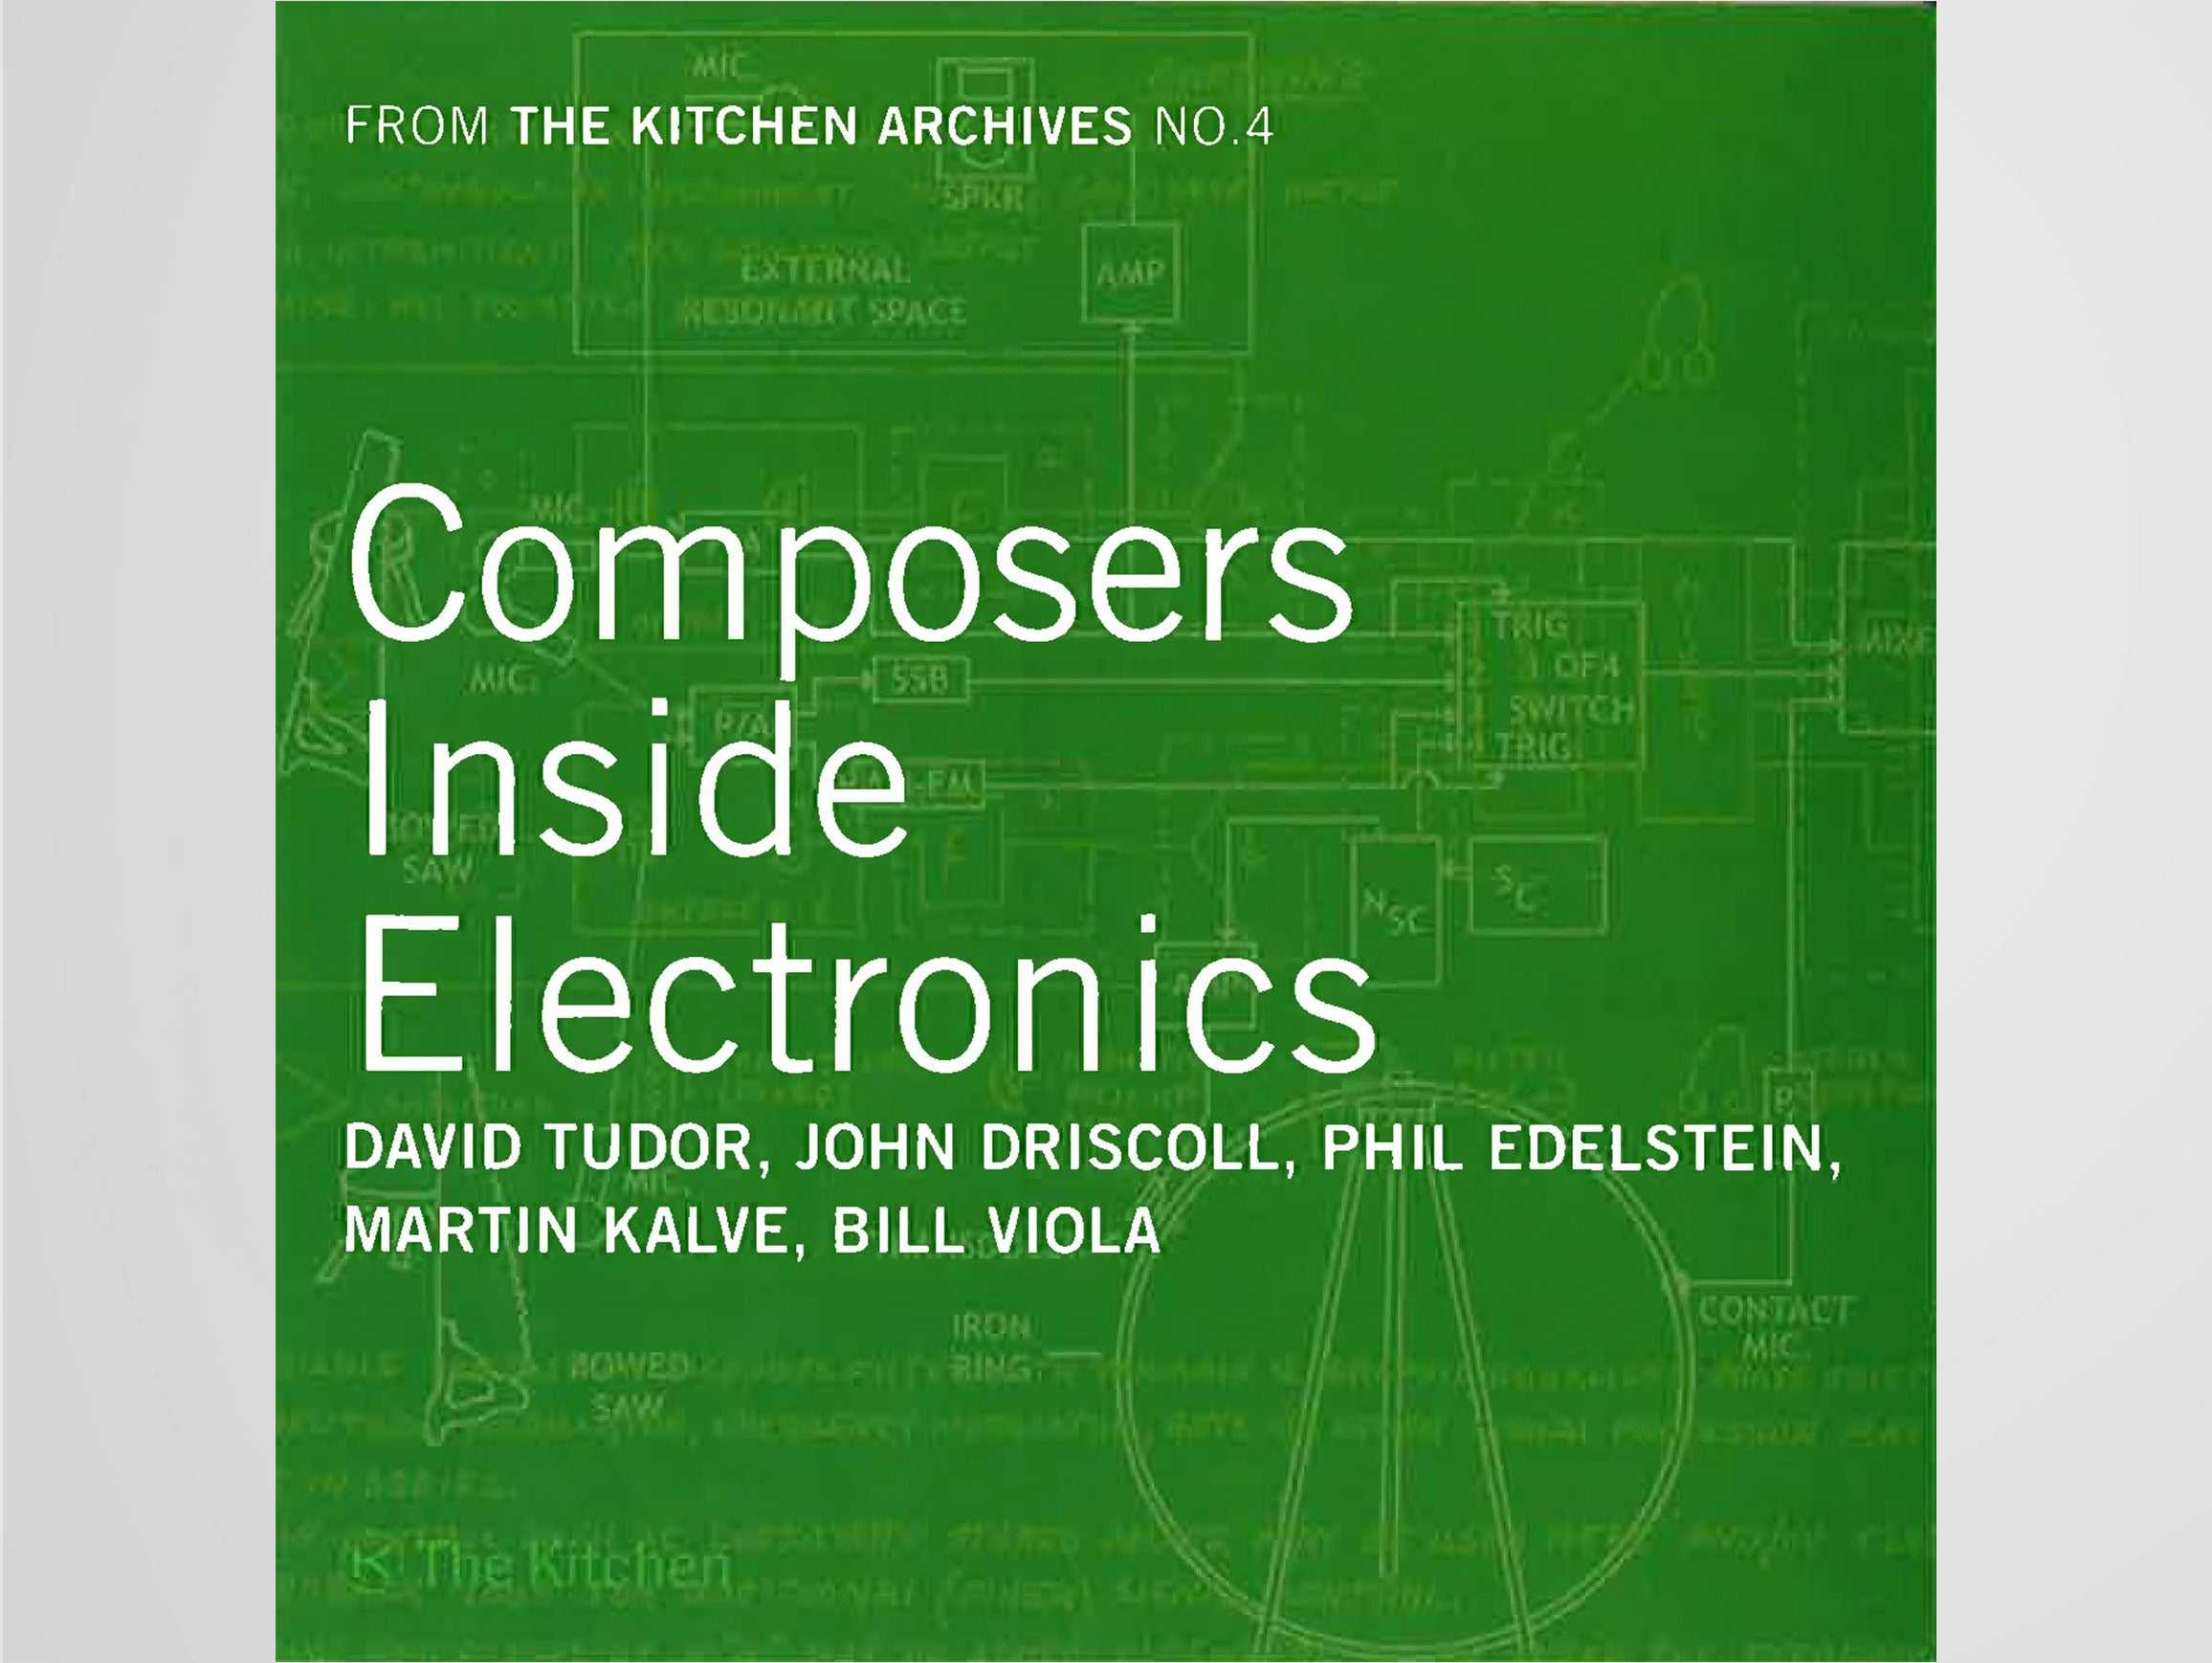 Composers Inside Electronics (from The Kitchen Archives No. 4)